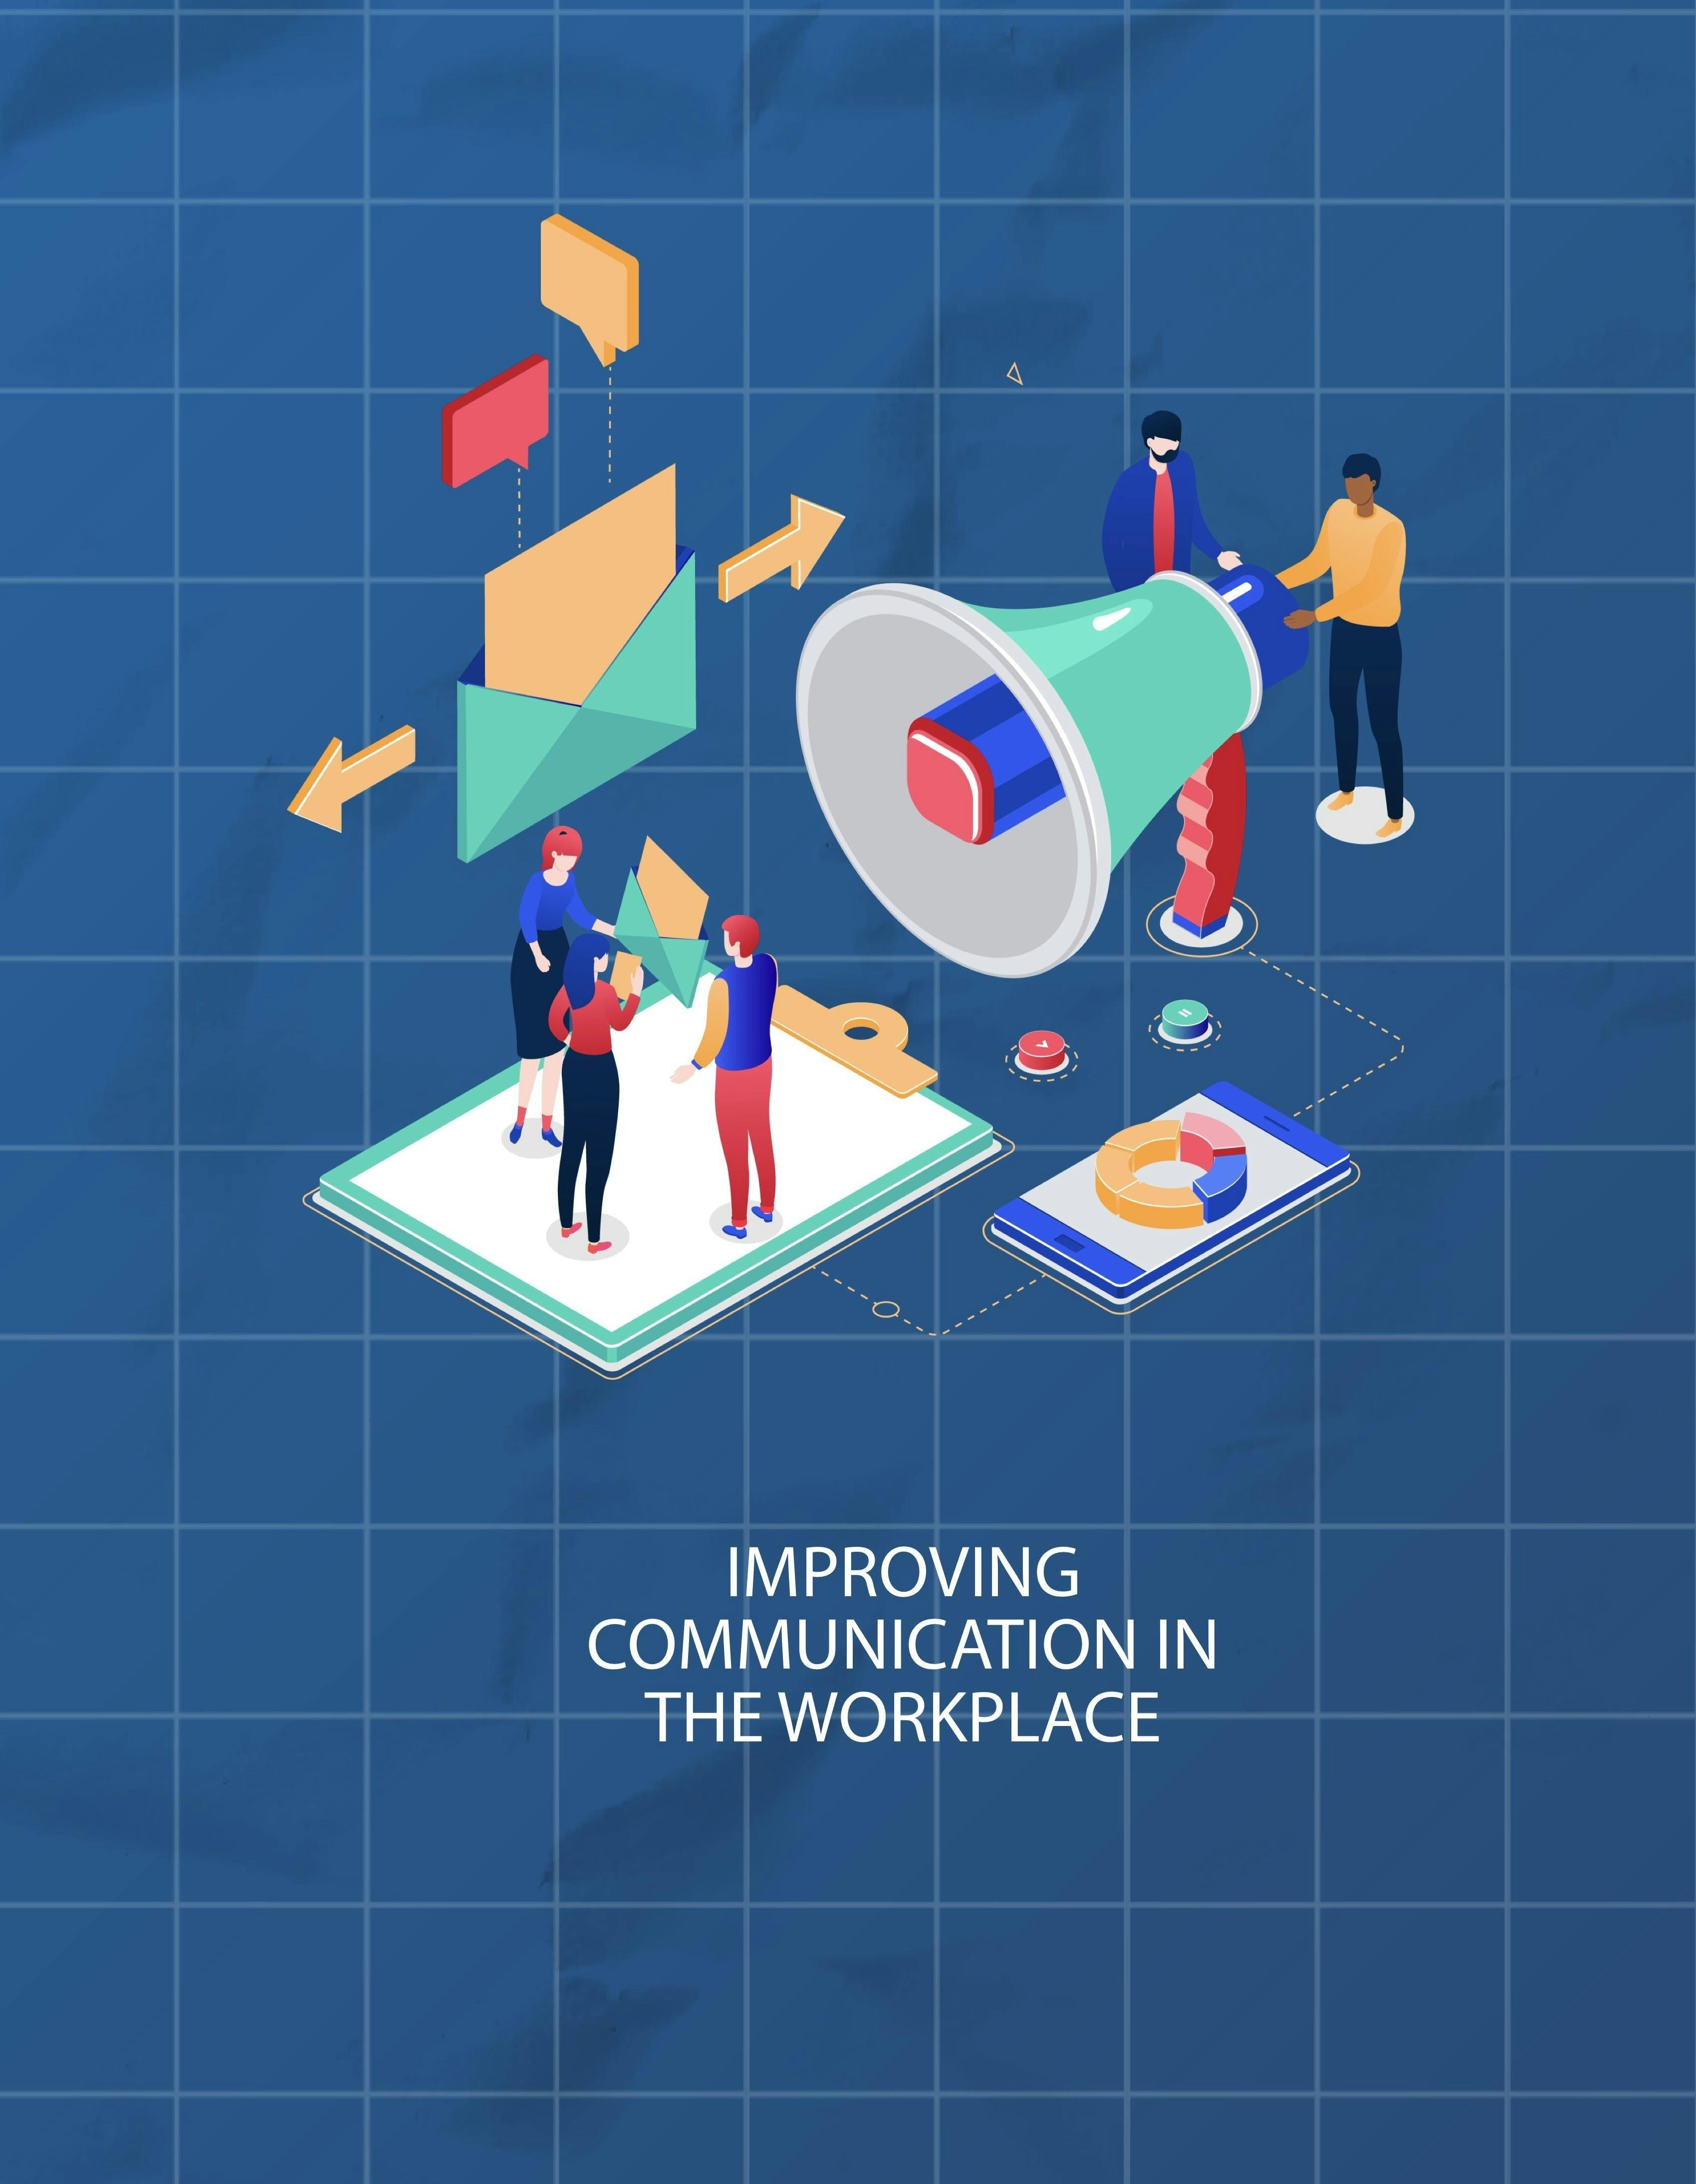 IMPROVING COMMUNICATION IN THE WORKPLACE